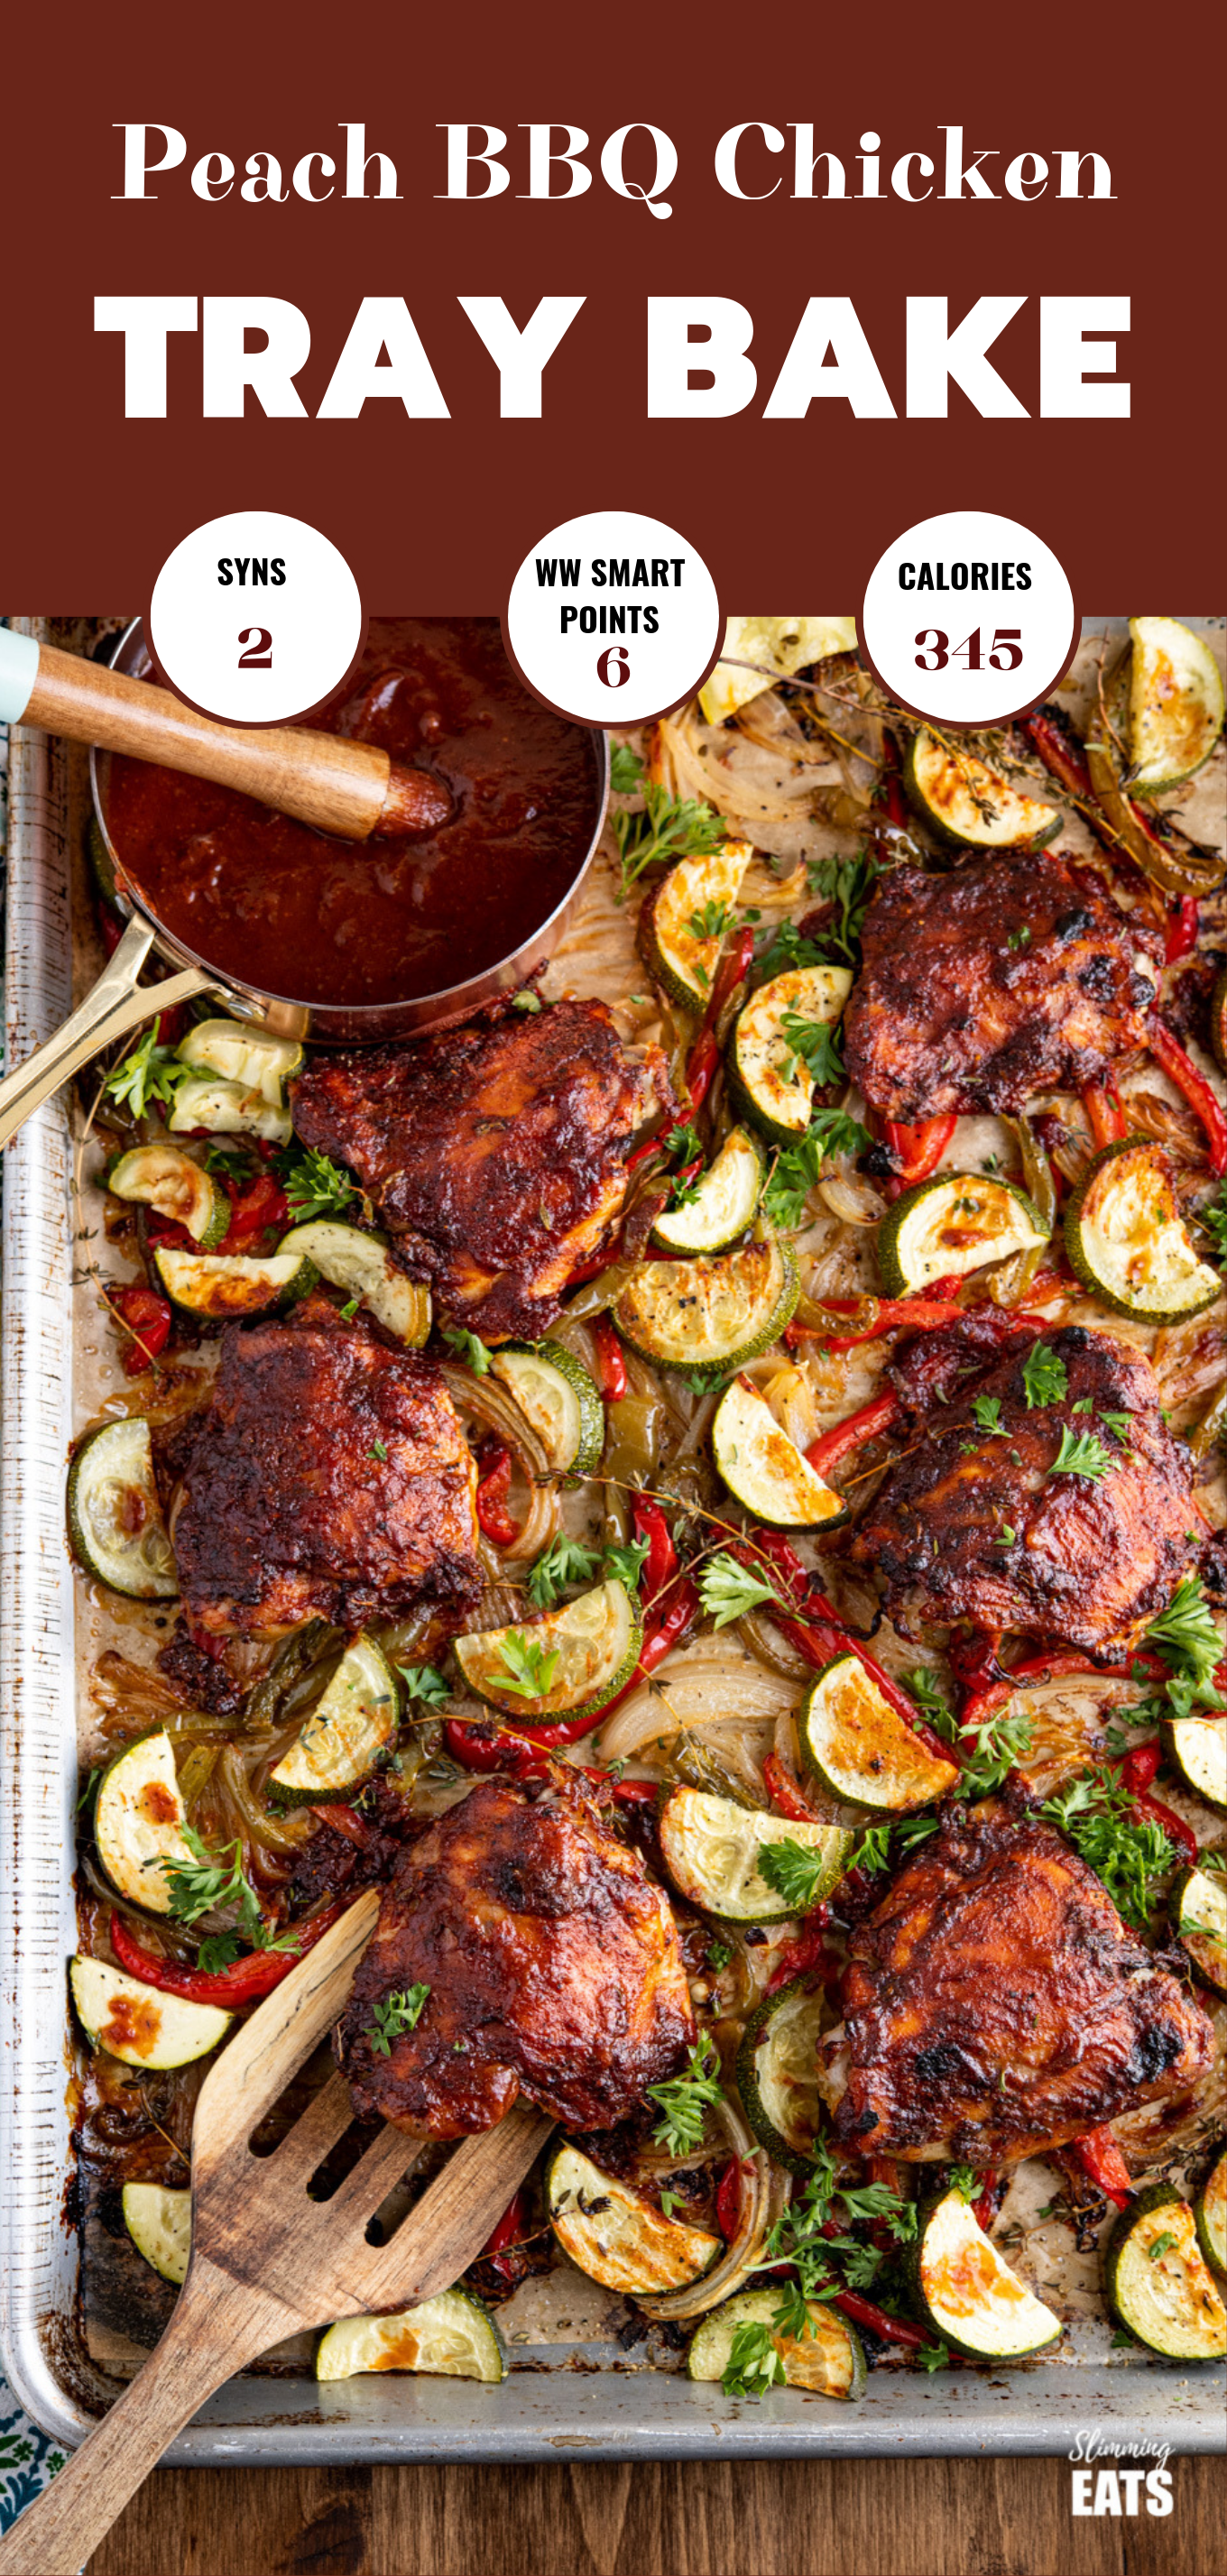 Peach barbecue chicken tray bake feature pin